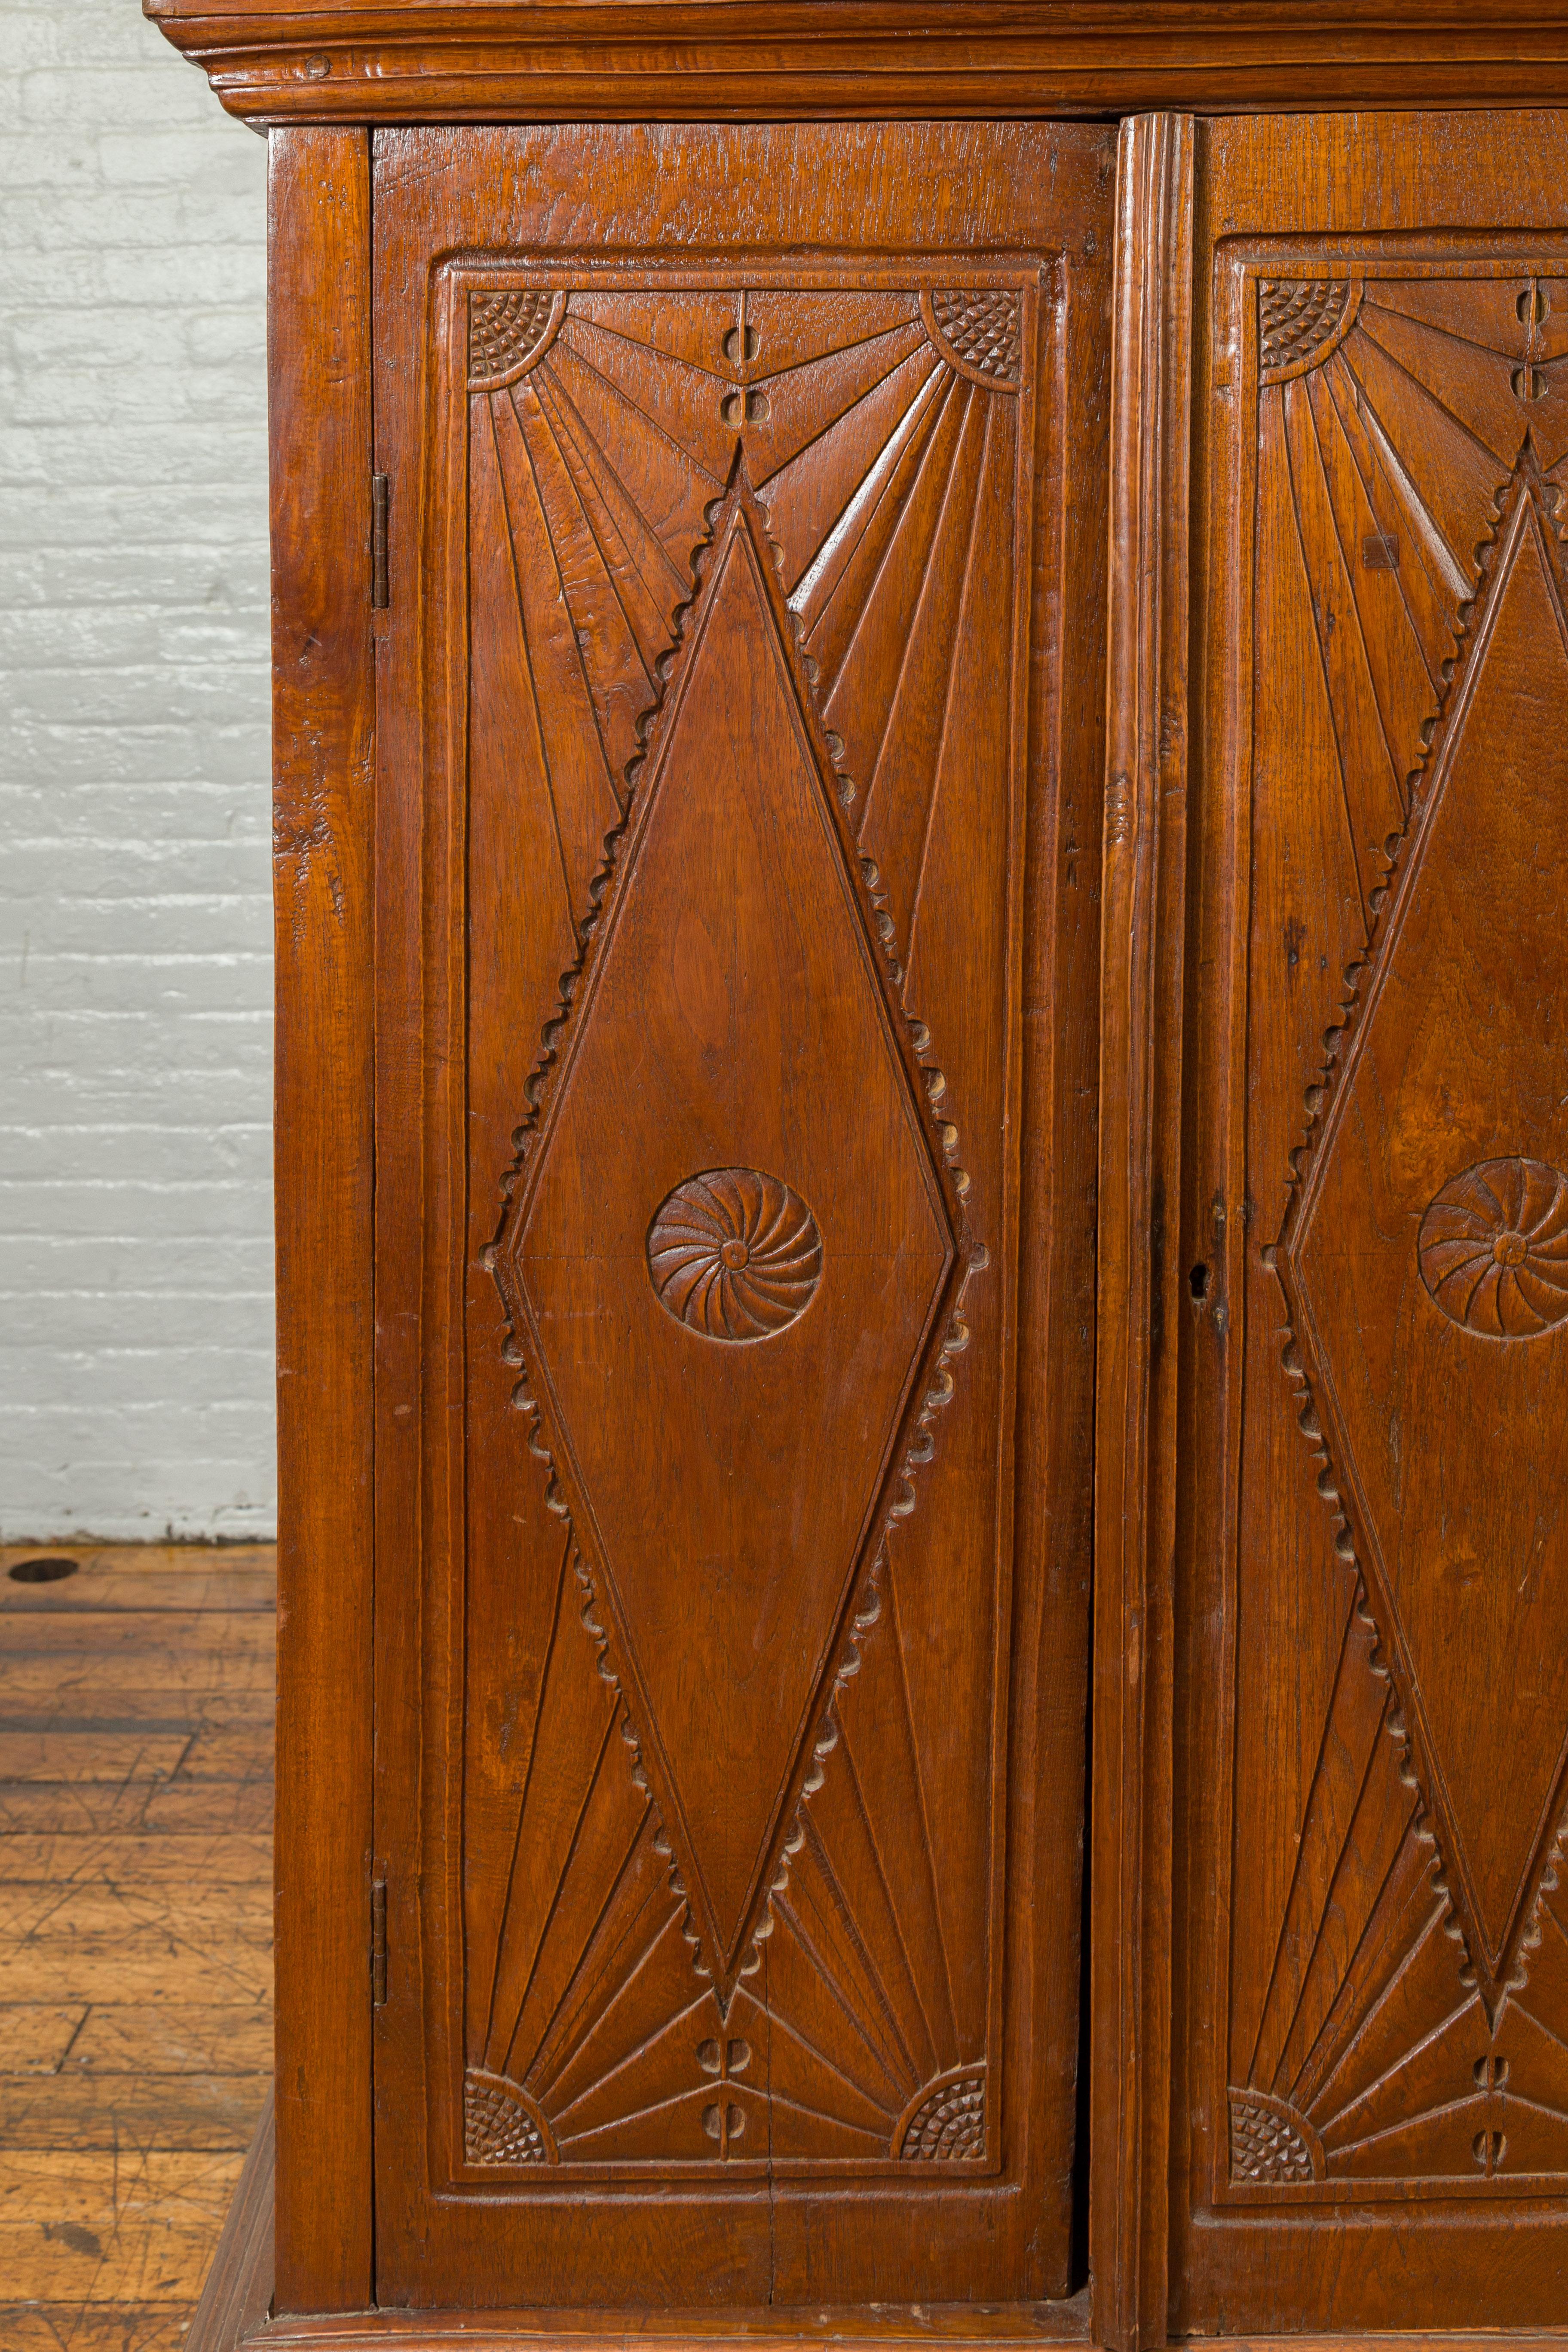 Dutch Colonial Carved Wooden Cabinet with Diamonds and Radiating Motifs In Good Condition For Sale In Yonkers, NY